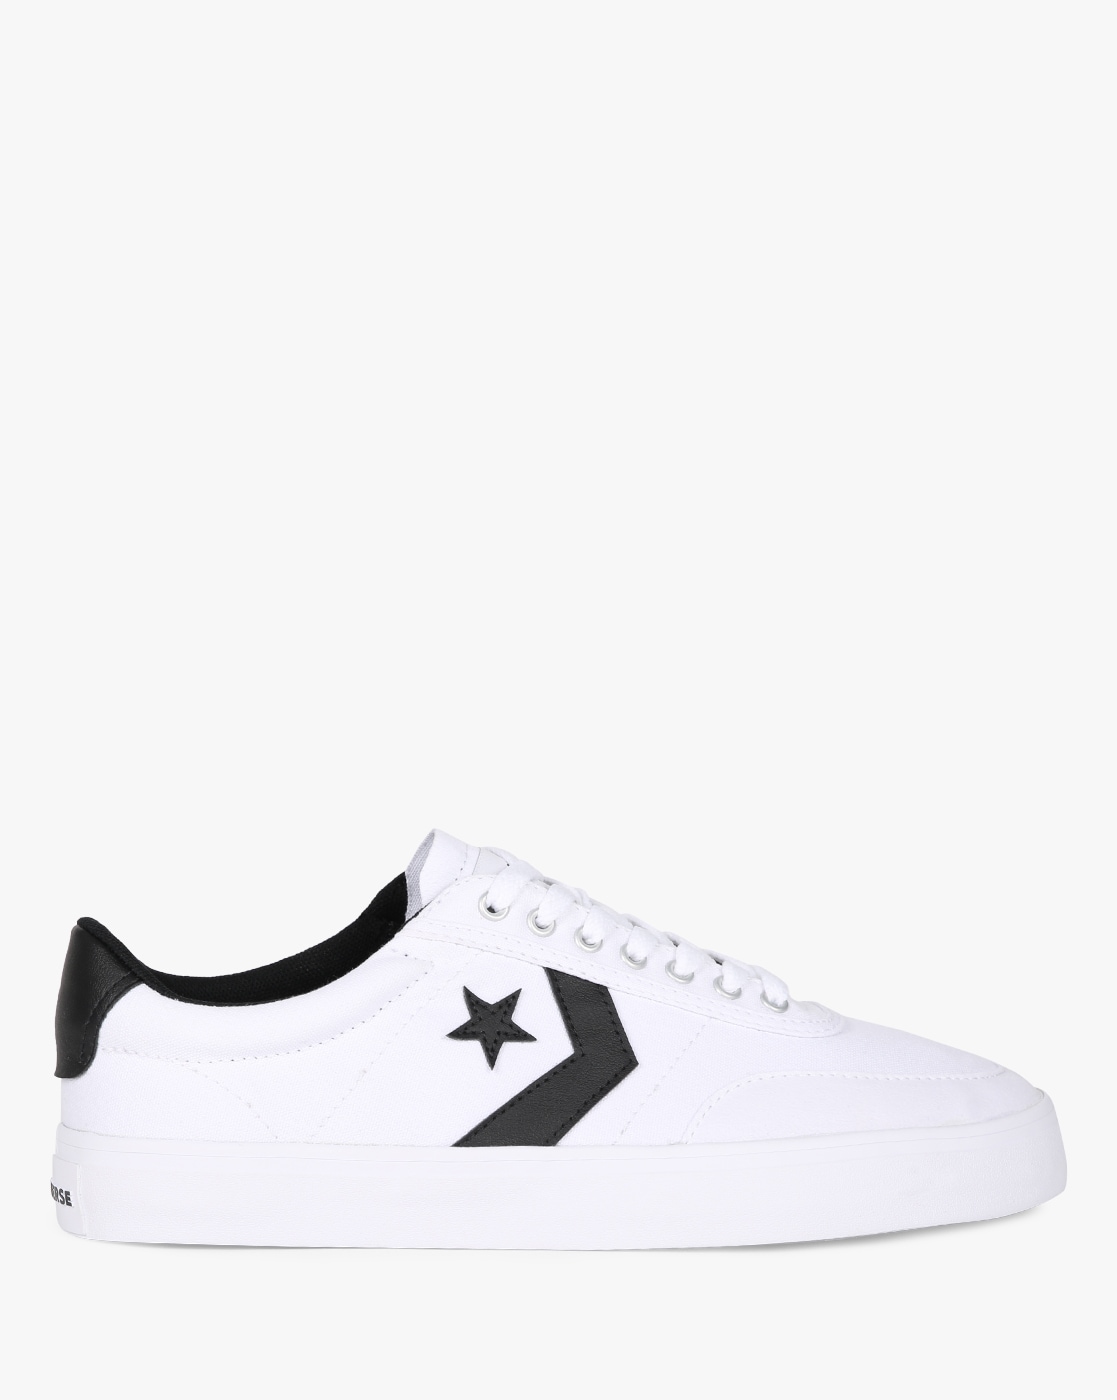 Buy White Sneakers for Men by CONVERSE 